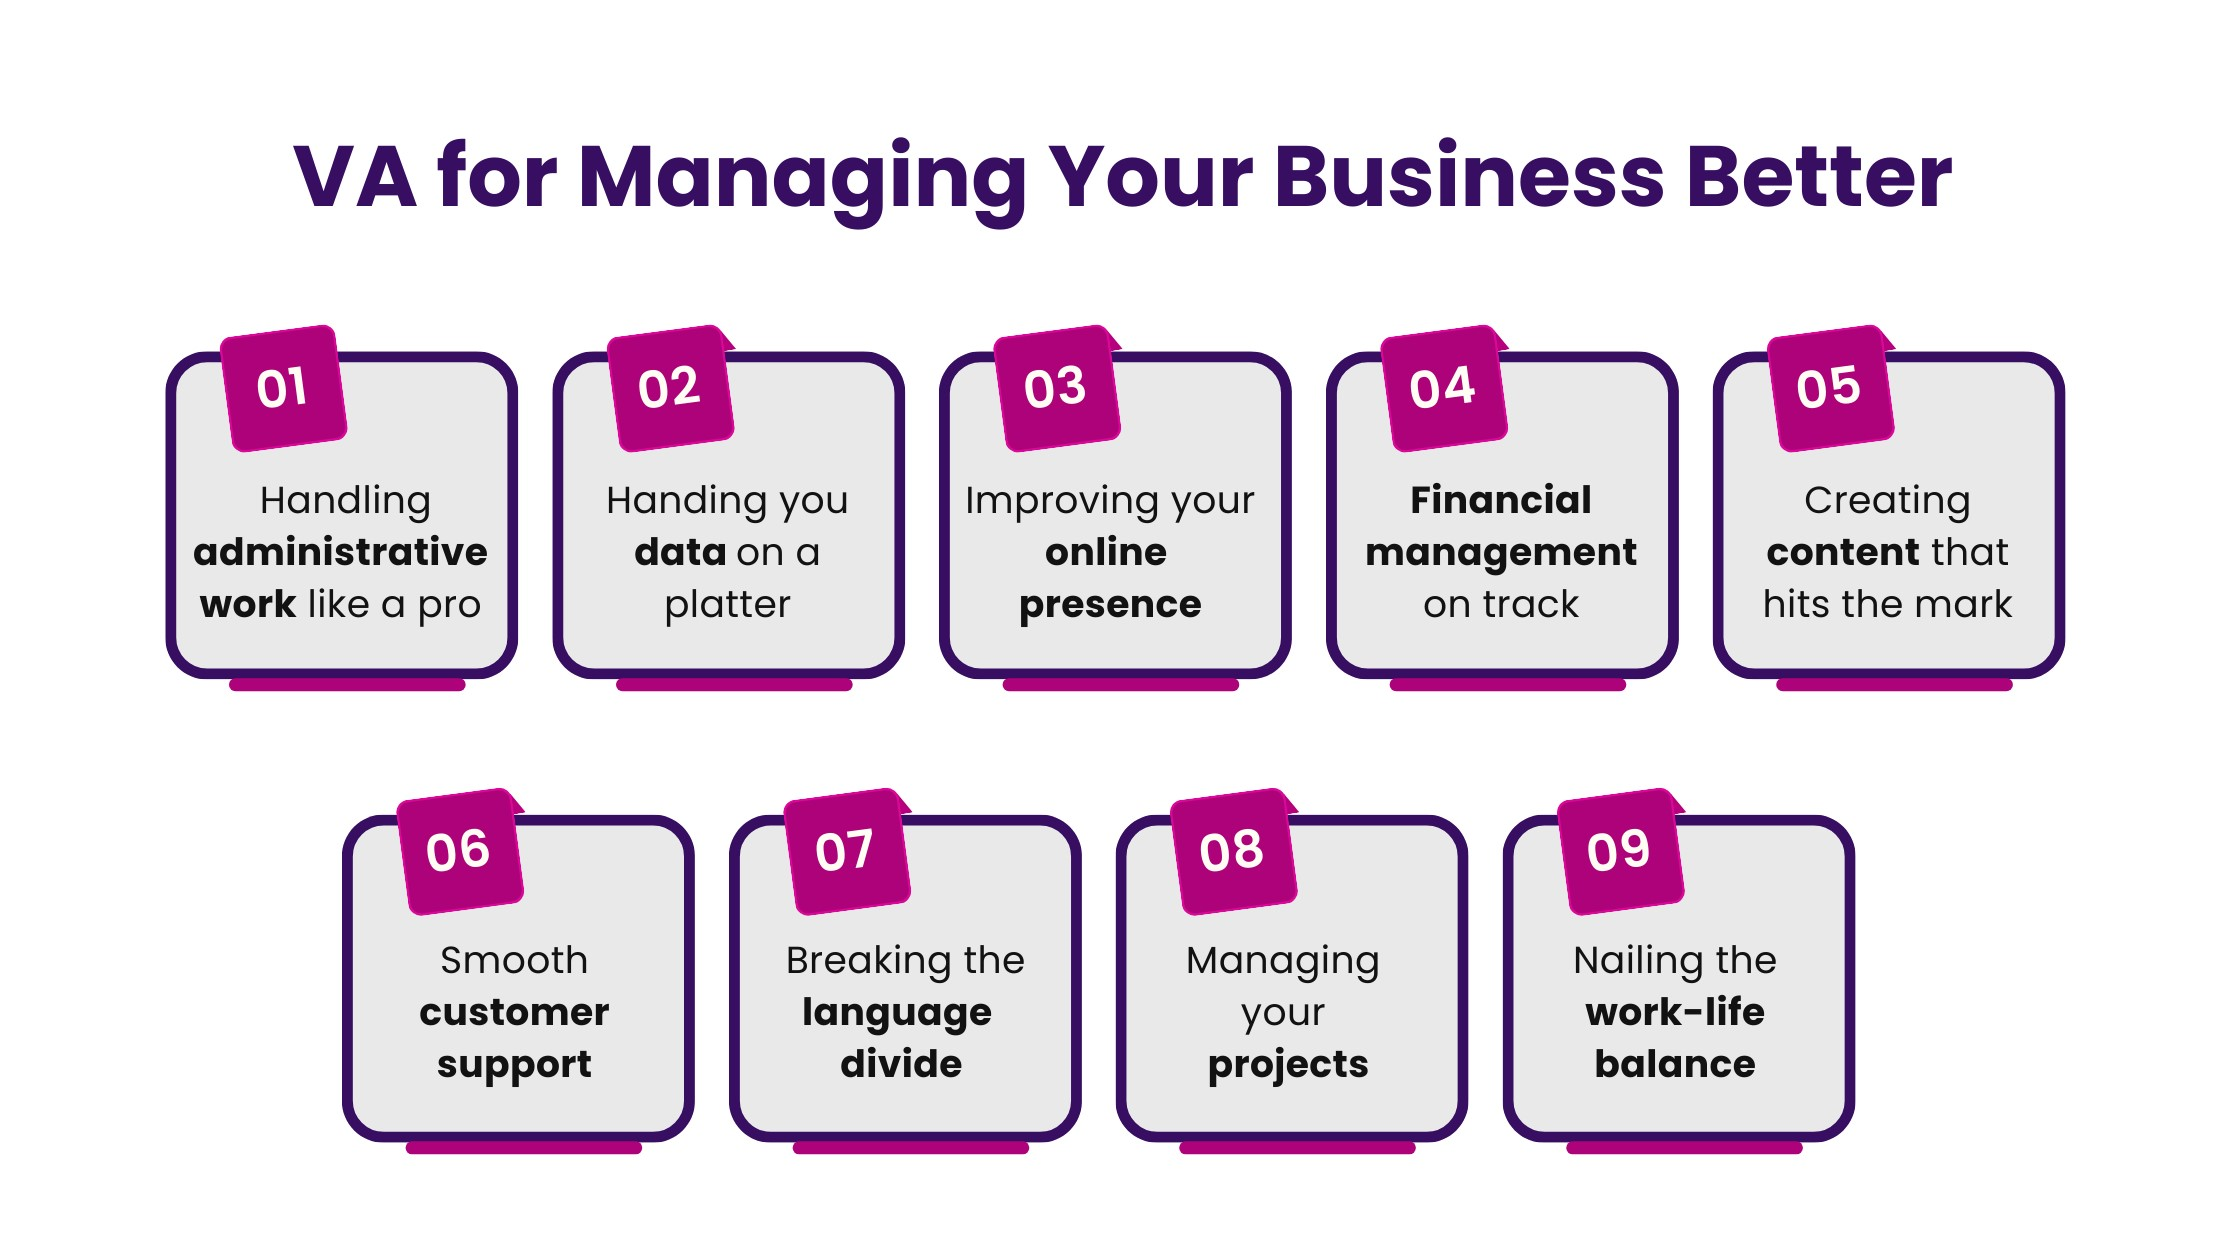 Managing your business better